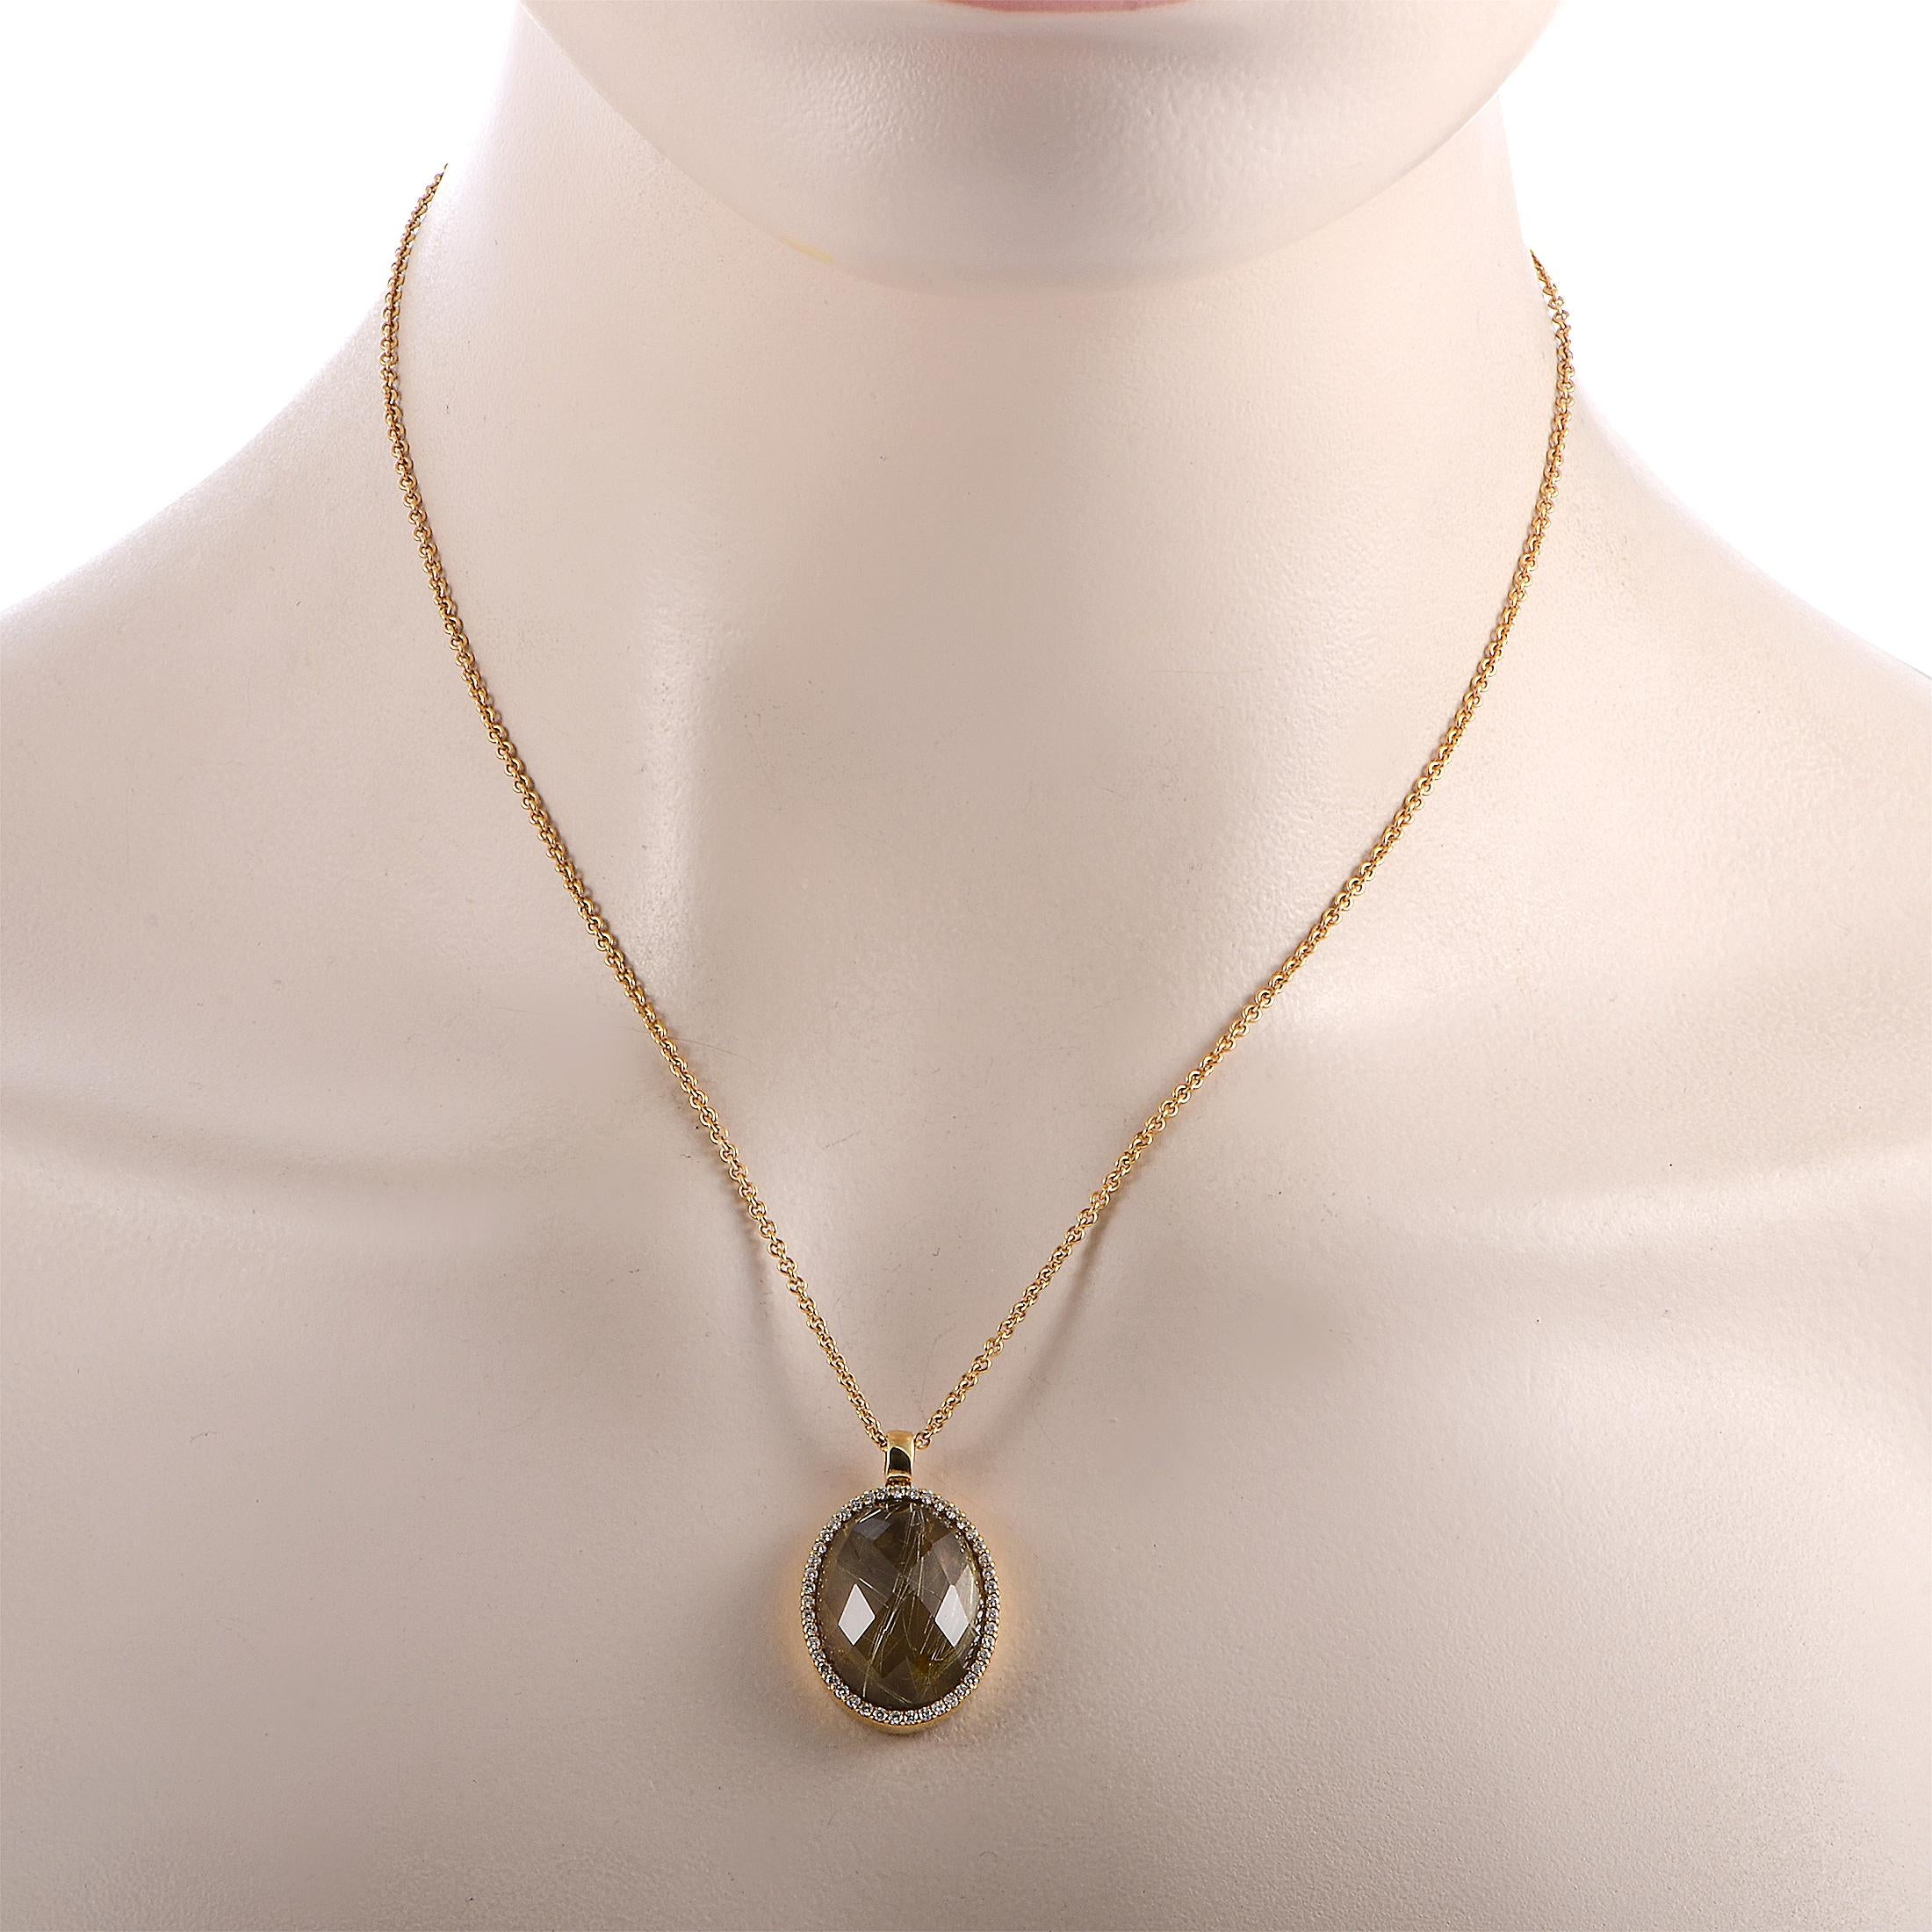 This Roberto Coin necklace is crafted from 18K rose gold, boasting an 18” chain with lobster claw closure and a pendant that measures 1.25” in length and 0.75” in width. The necklace weighs 15.2 grams and is set with a smoky quartz and a total of